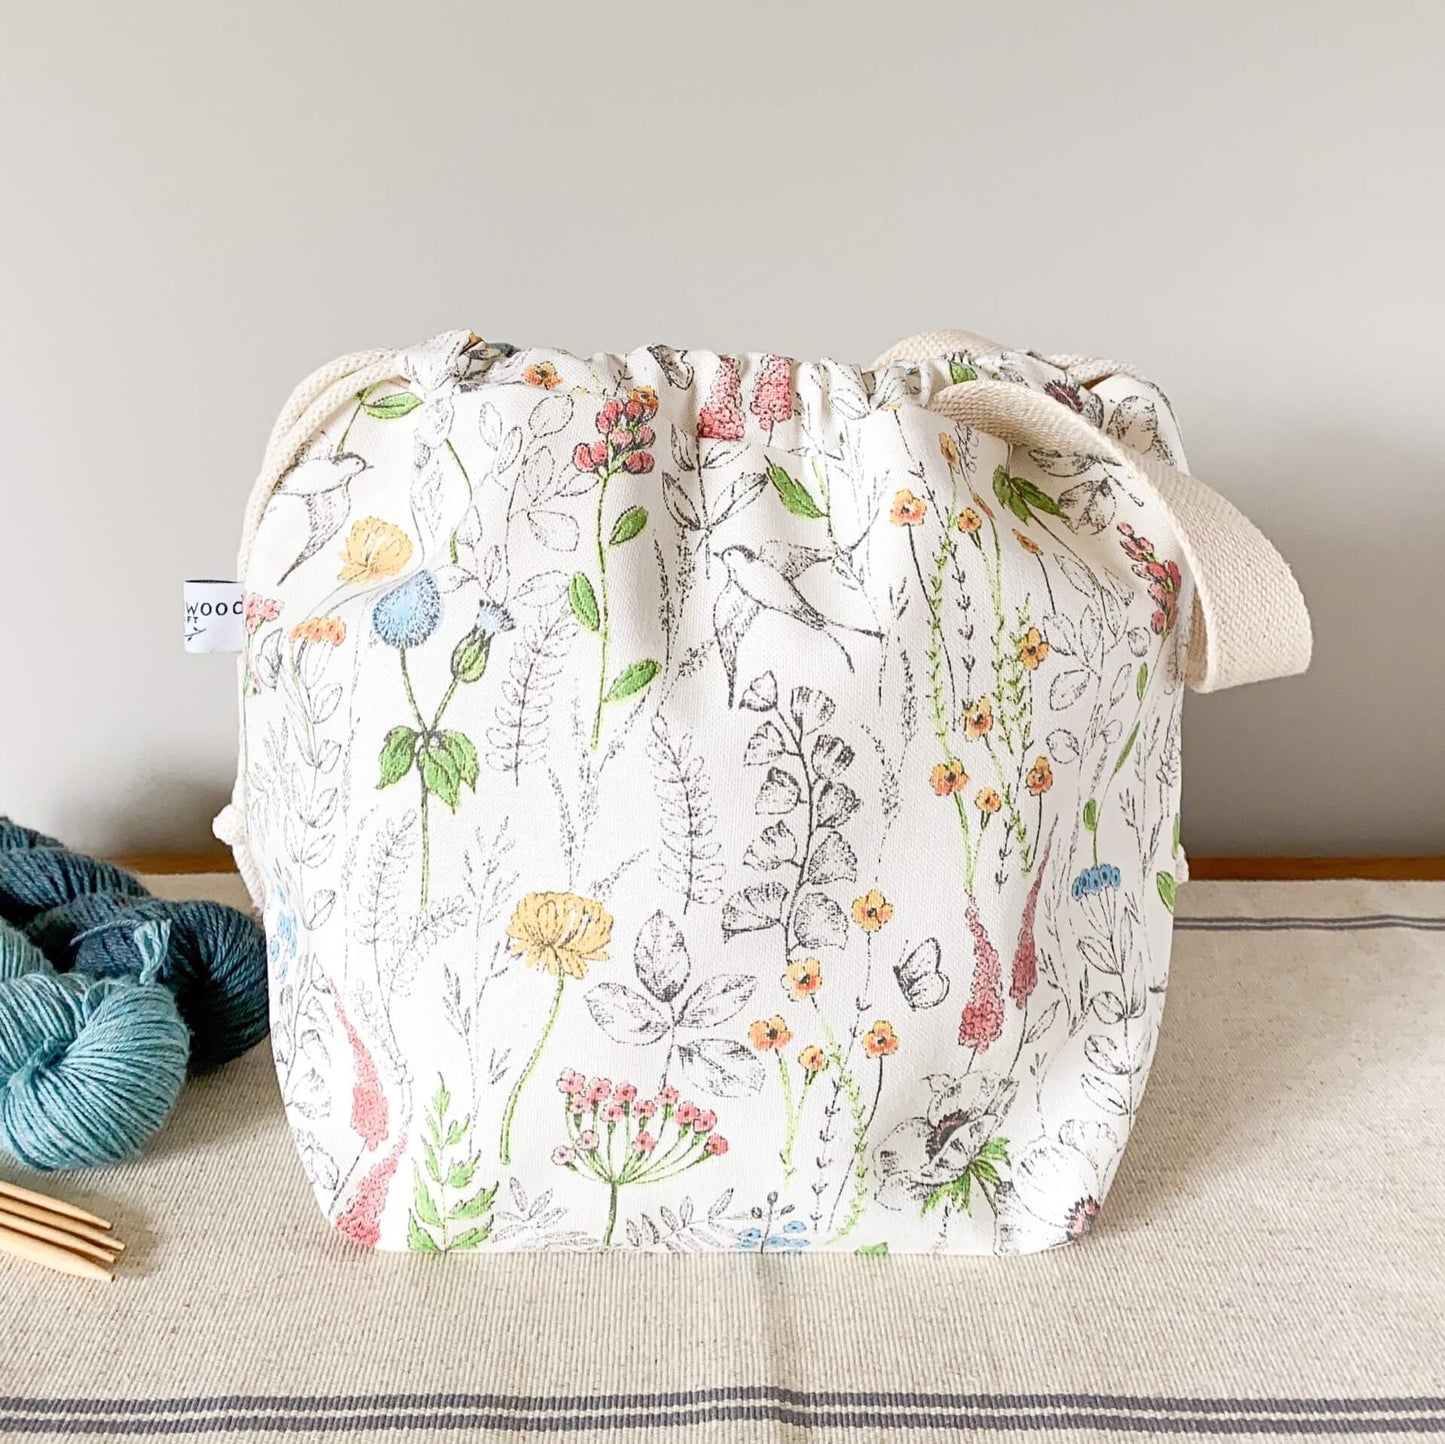 A summery project bag that features lots of wild flowers, birds and butterflies, sits on a table next to some skeins of yarn and a set of wooden knitting needles. 